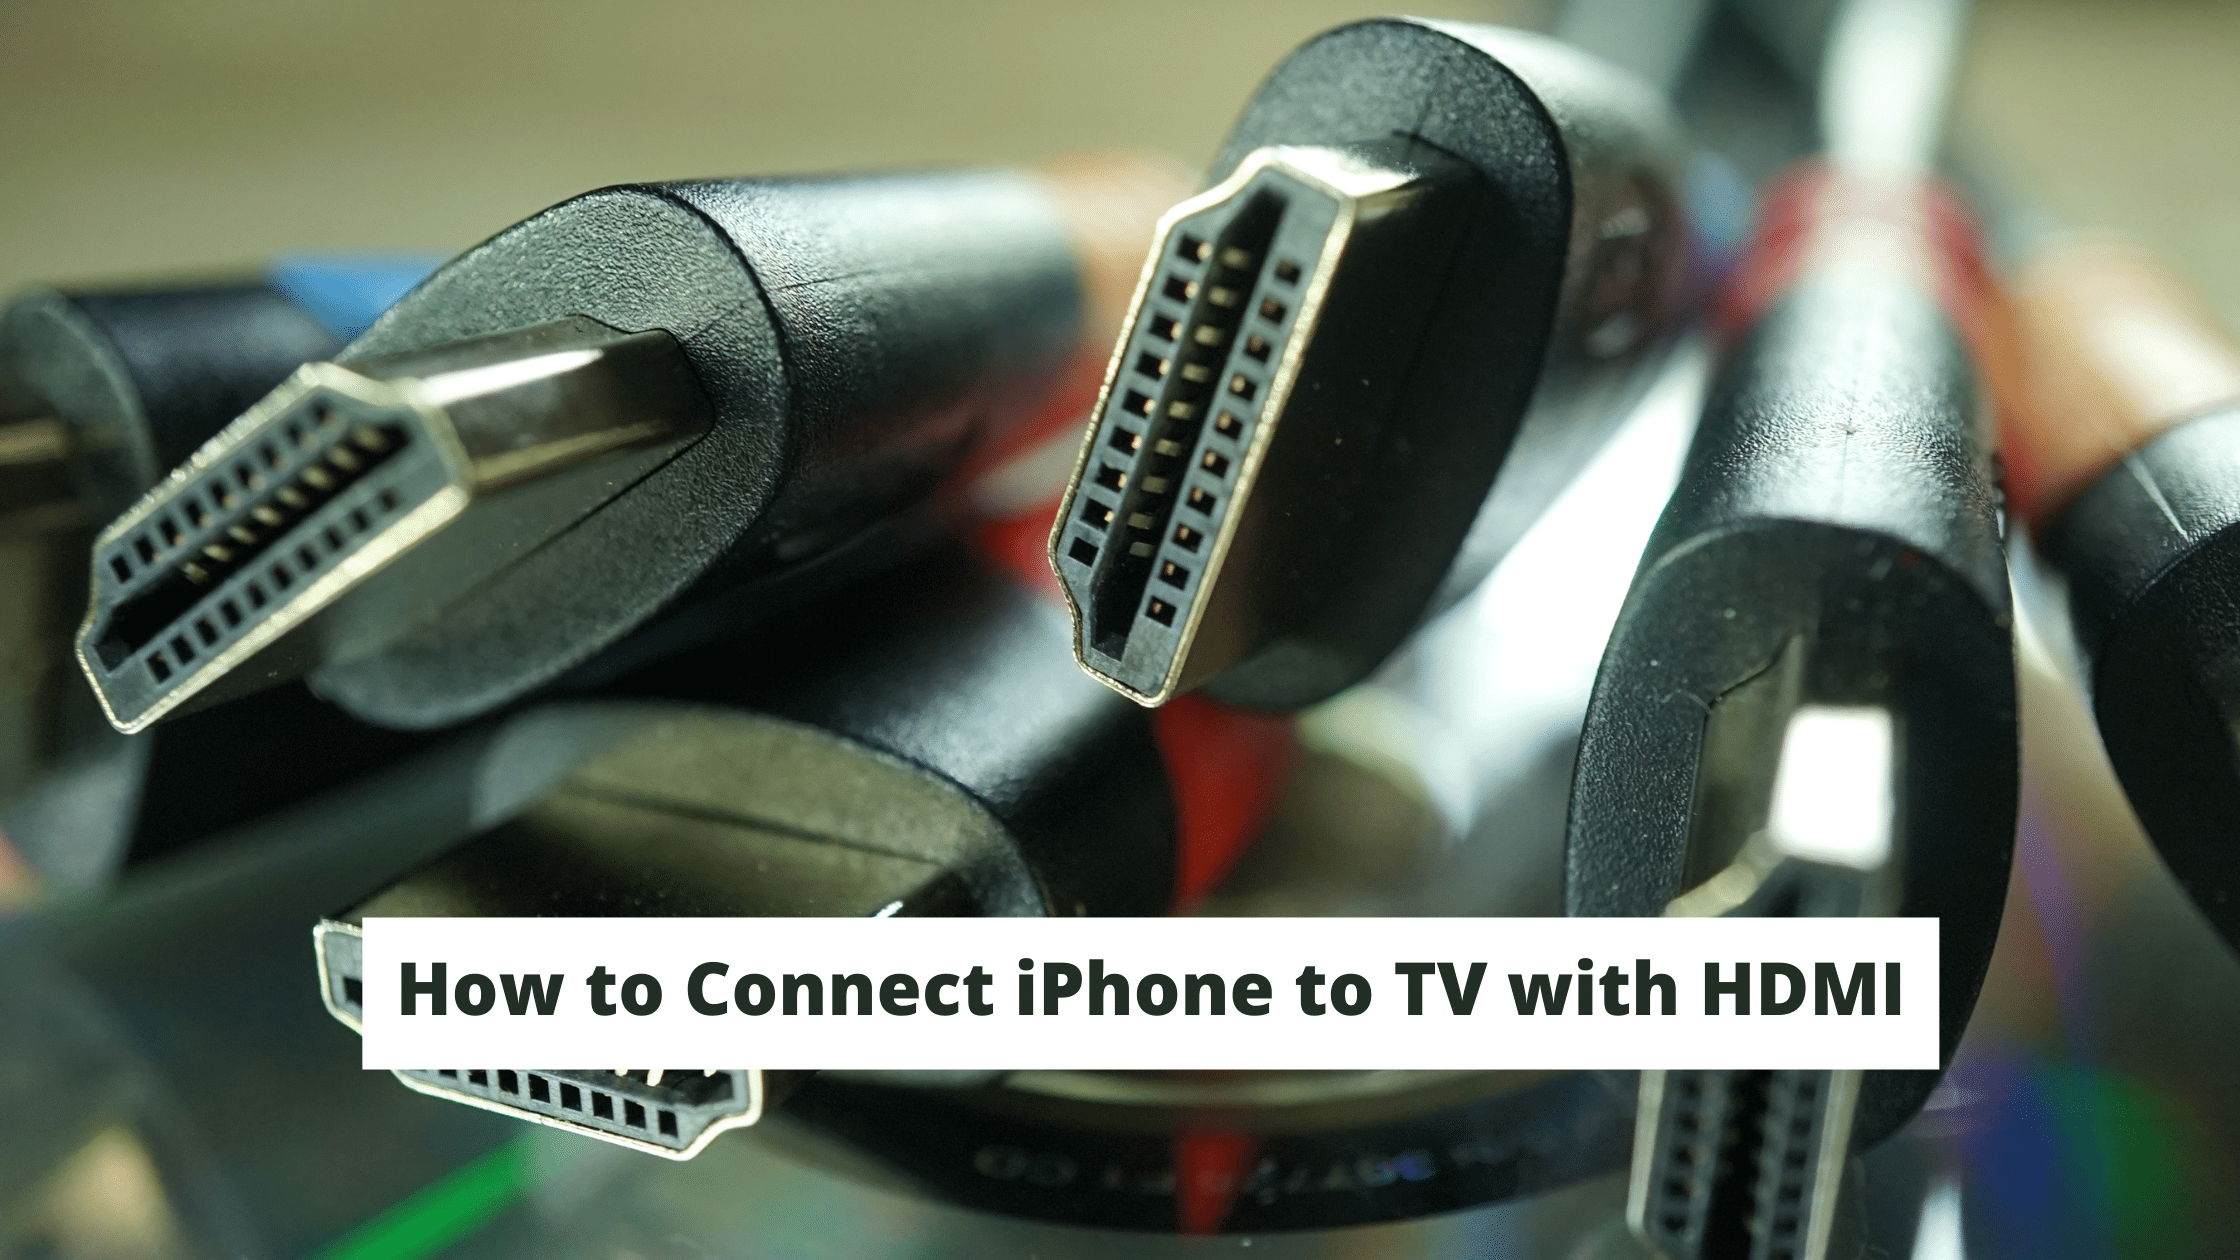 How to Connect iPhone to TV with HDMI